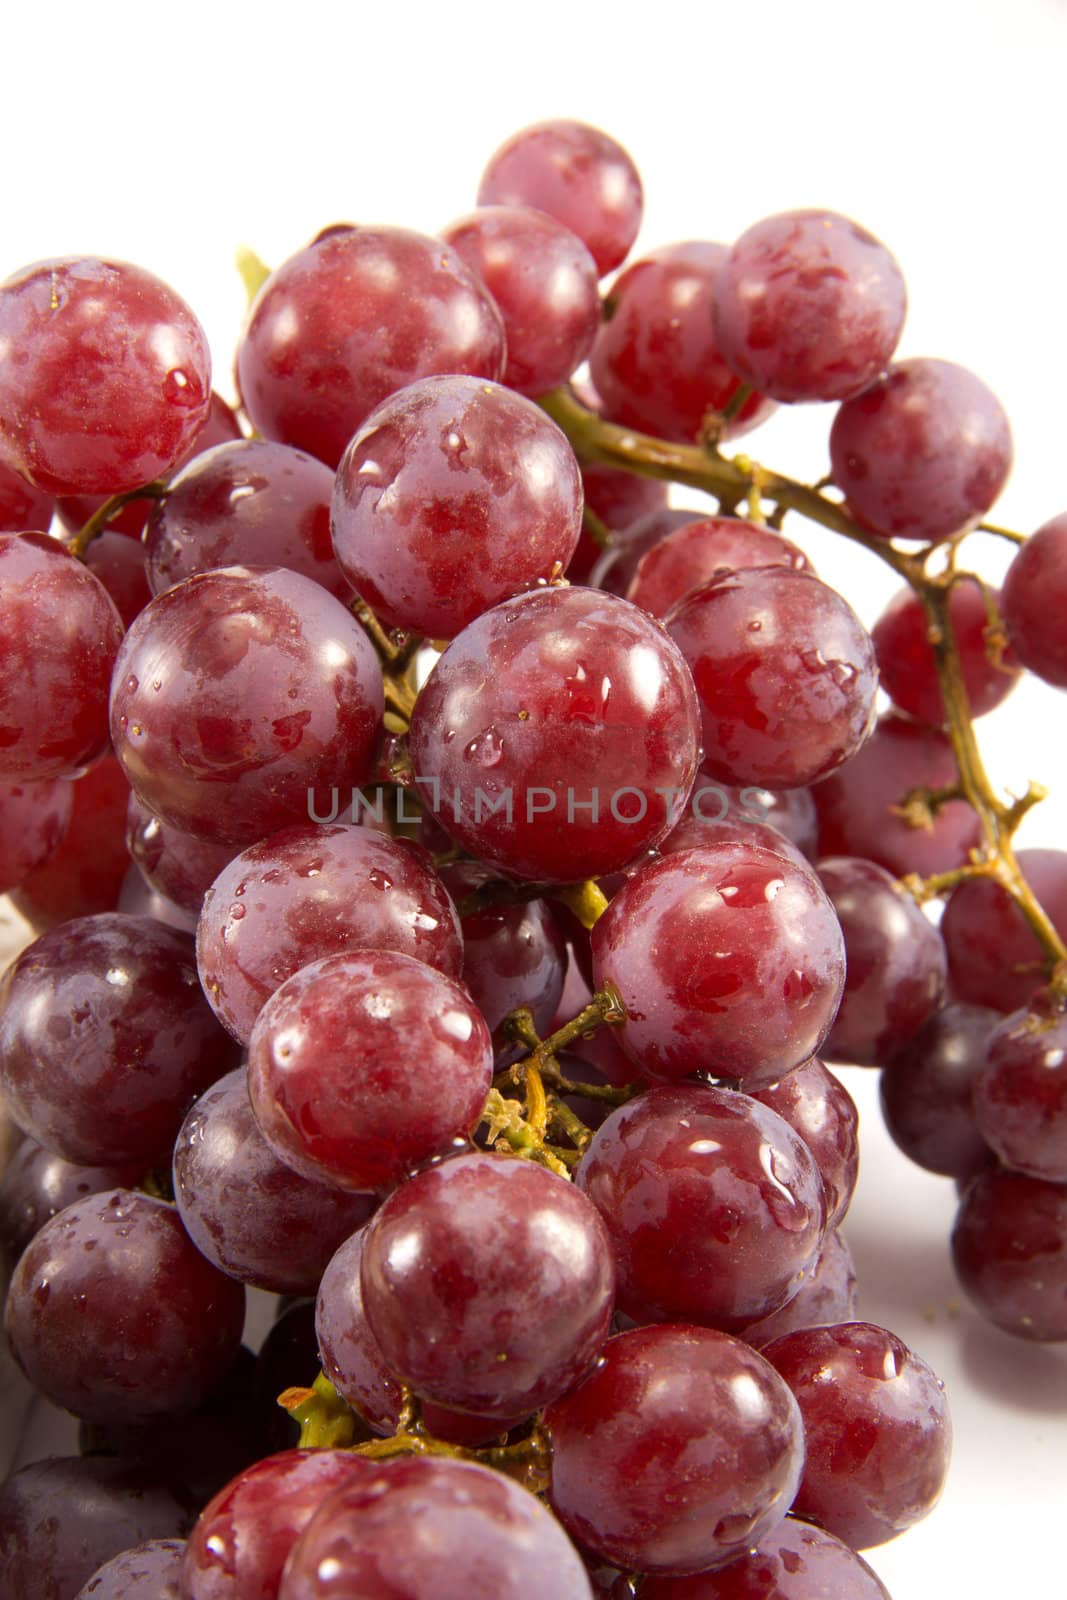 Picture of a bunch of red grapes on a white background